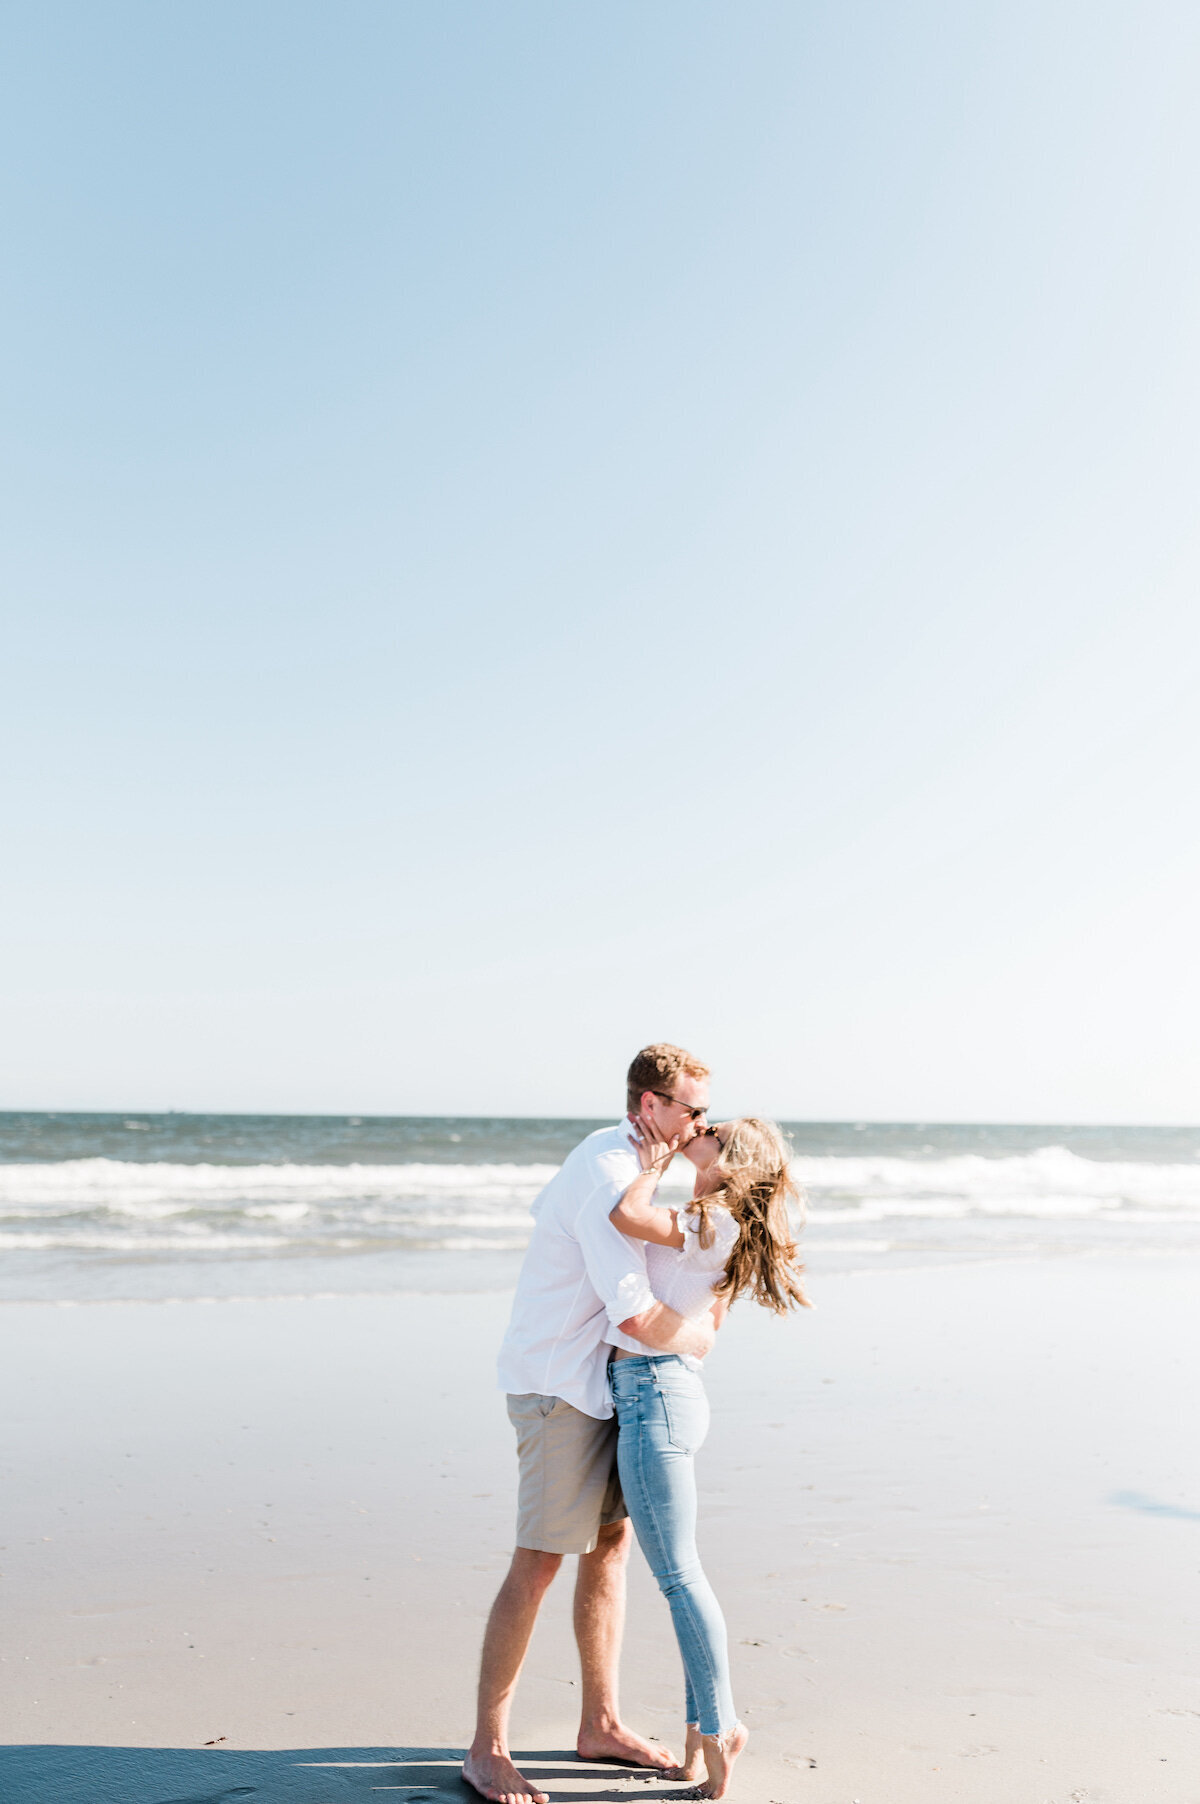 From mountain peaks to tranquil shores, our destination luxury engagement sessions celebrate your love's journey with an editorial twist. Every image is a curated masterpiece, blending elegance and exploration.